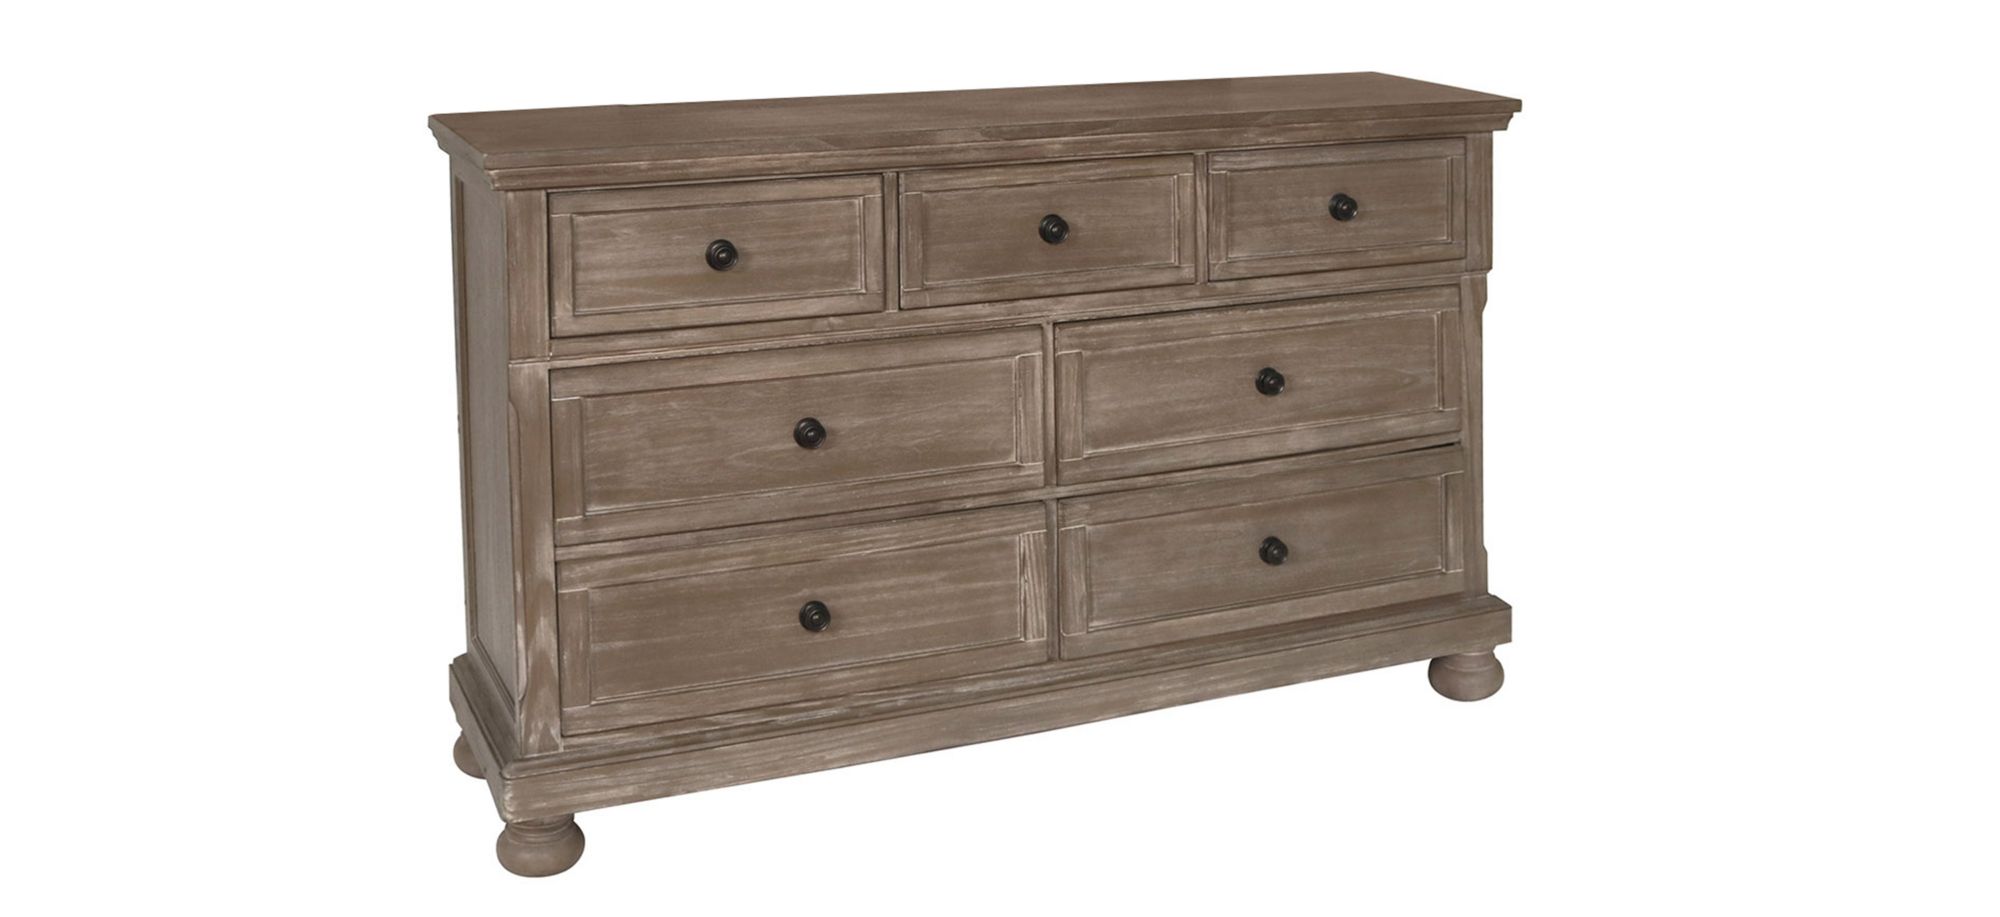 Allegra Bedroom Dresser in Pewter by New Classic Home Furnishings